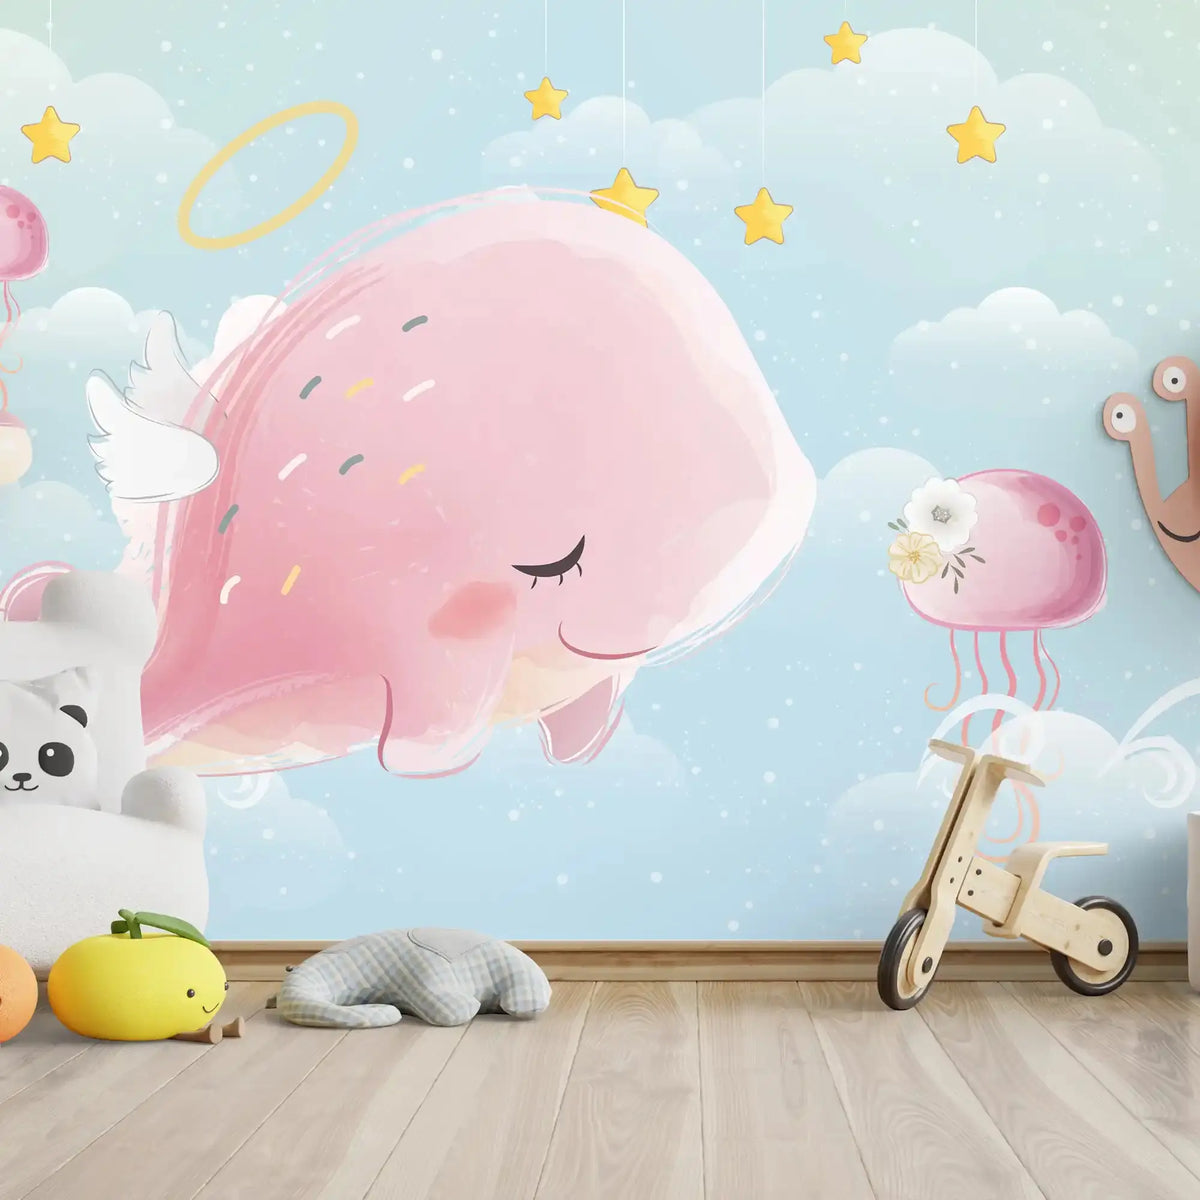 6017 / Baby Room Self Adhesive Wallpaper: Pastel Pink Whale and Starfish, Perfect for DIY Nursery Decor - Artevella